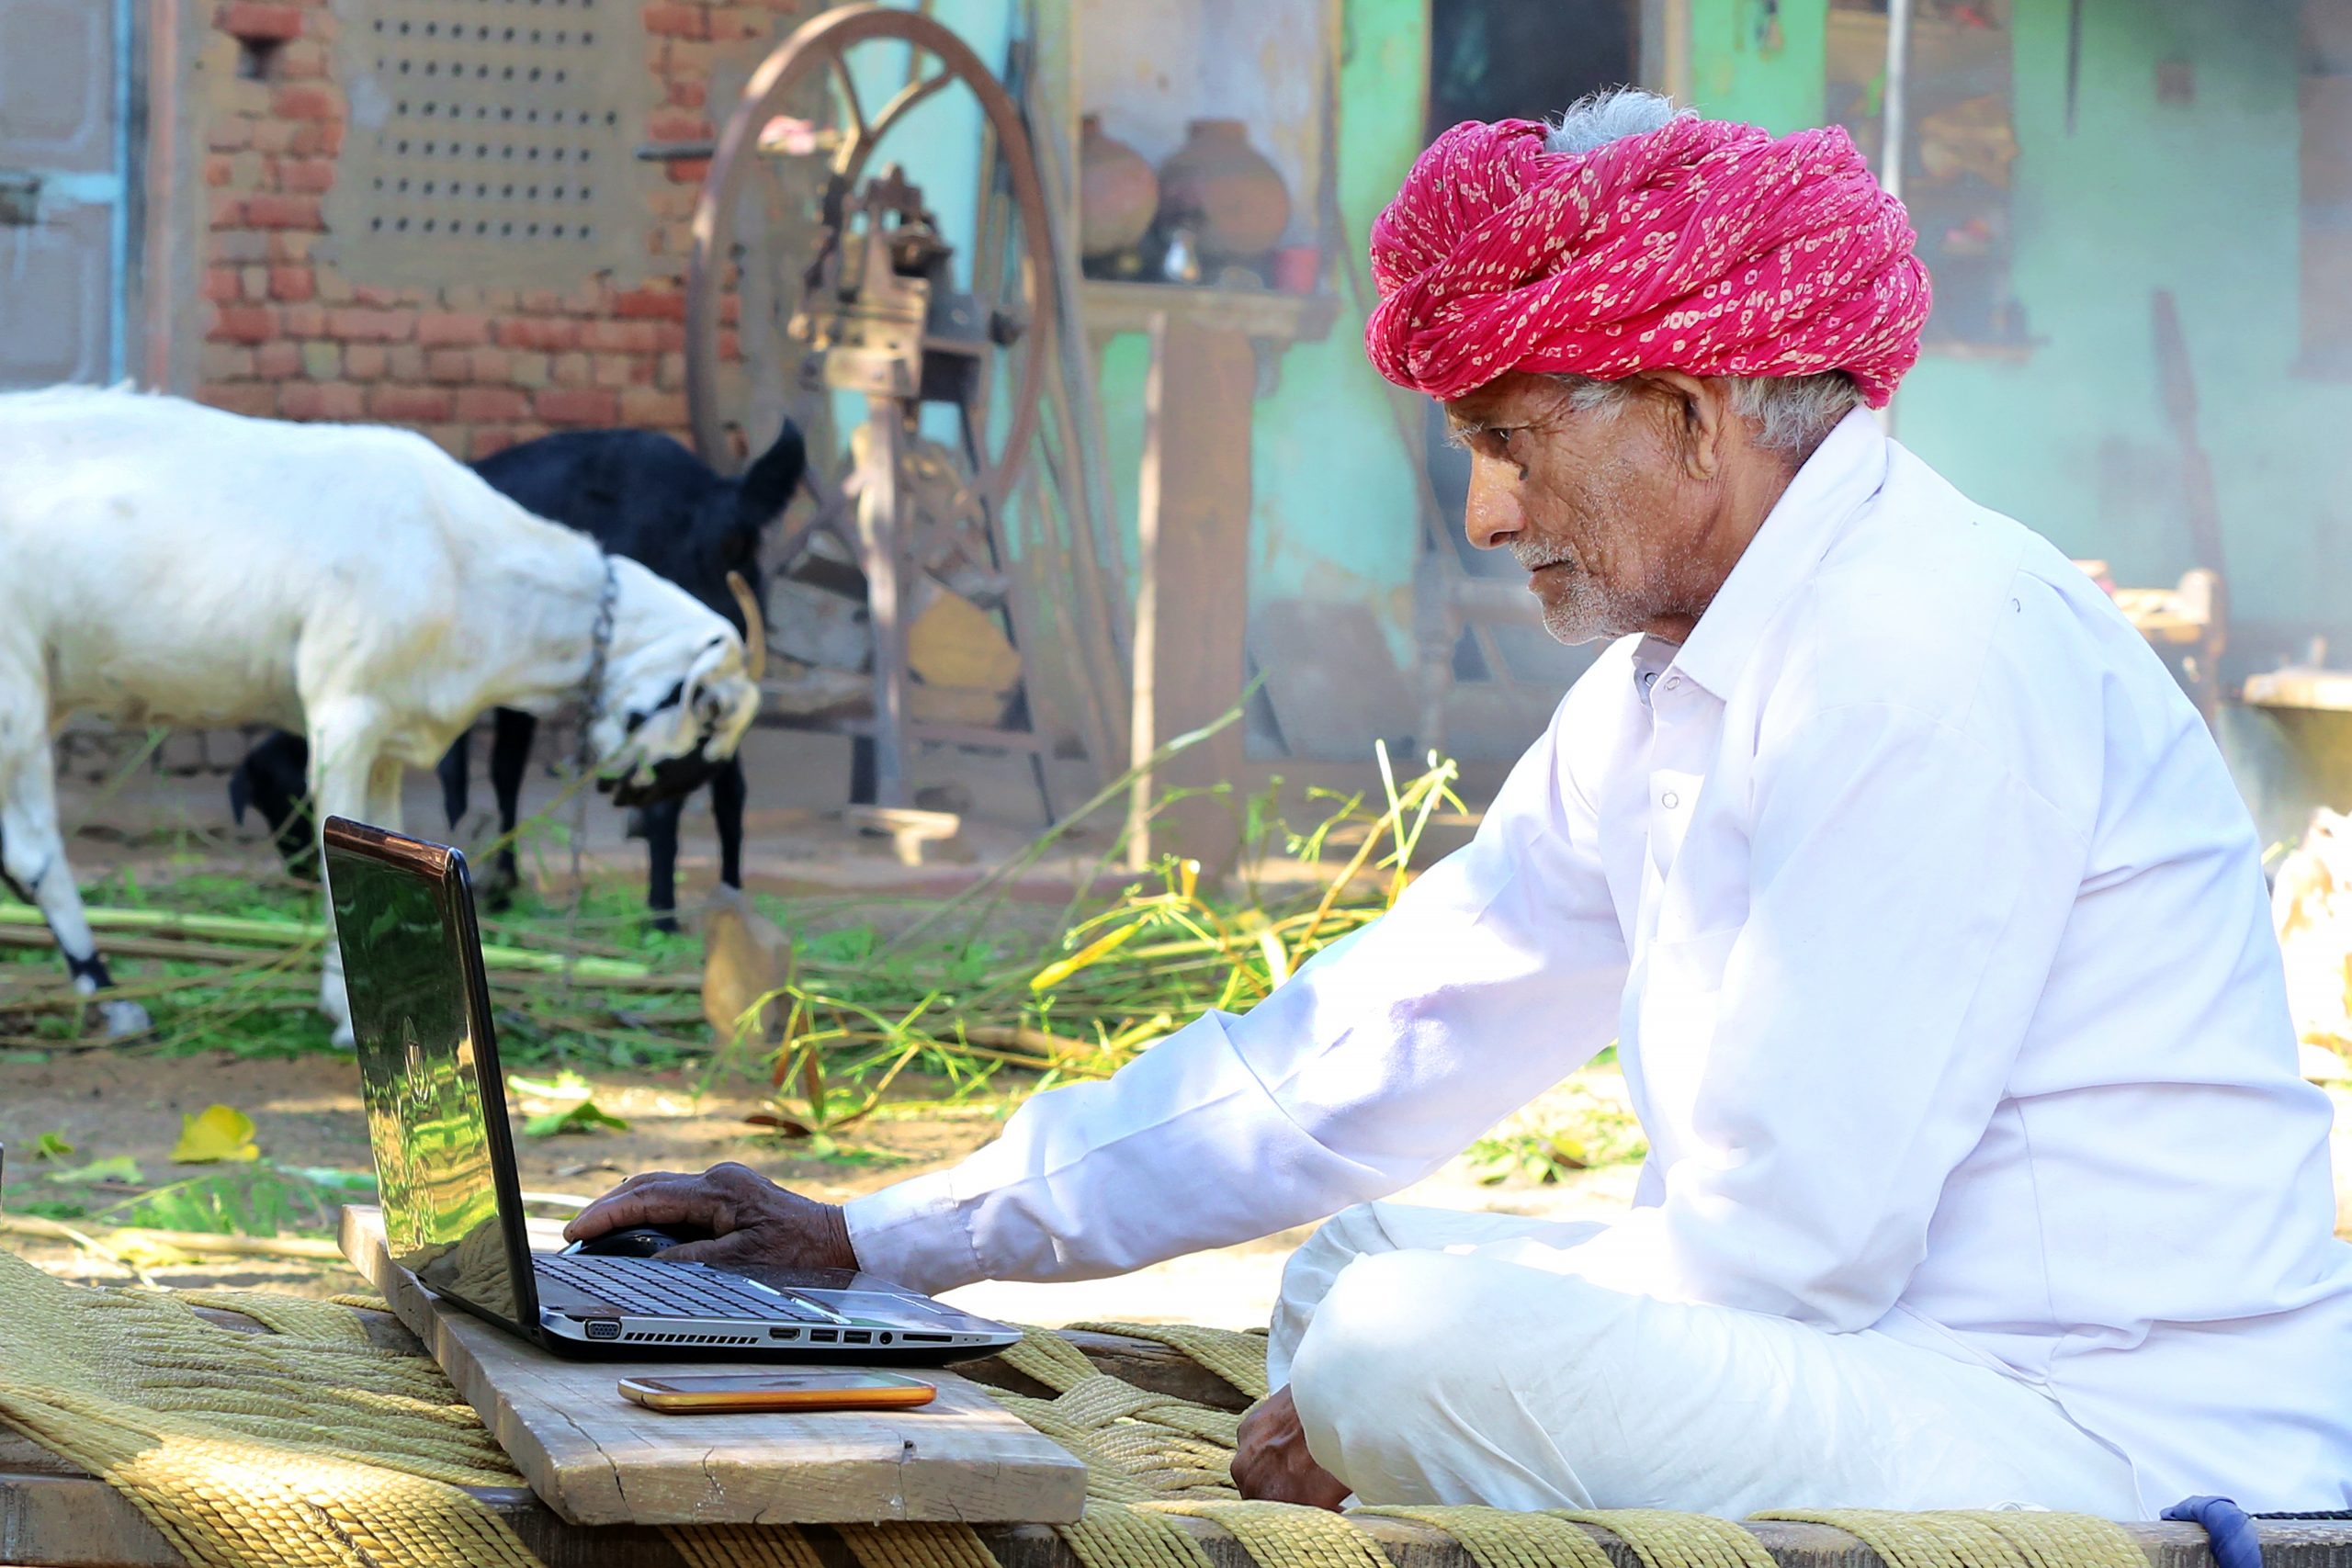 Driven by vernacular content, rural India sees 45% growth in internet users: Report